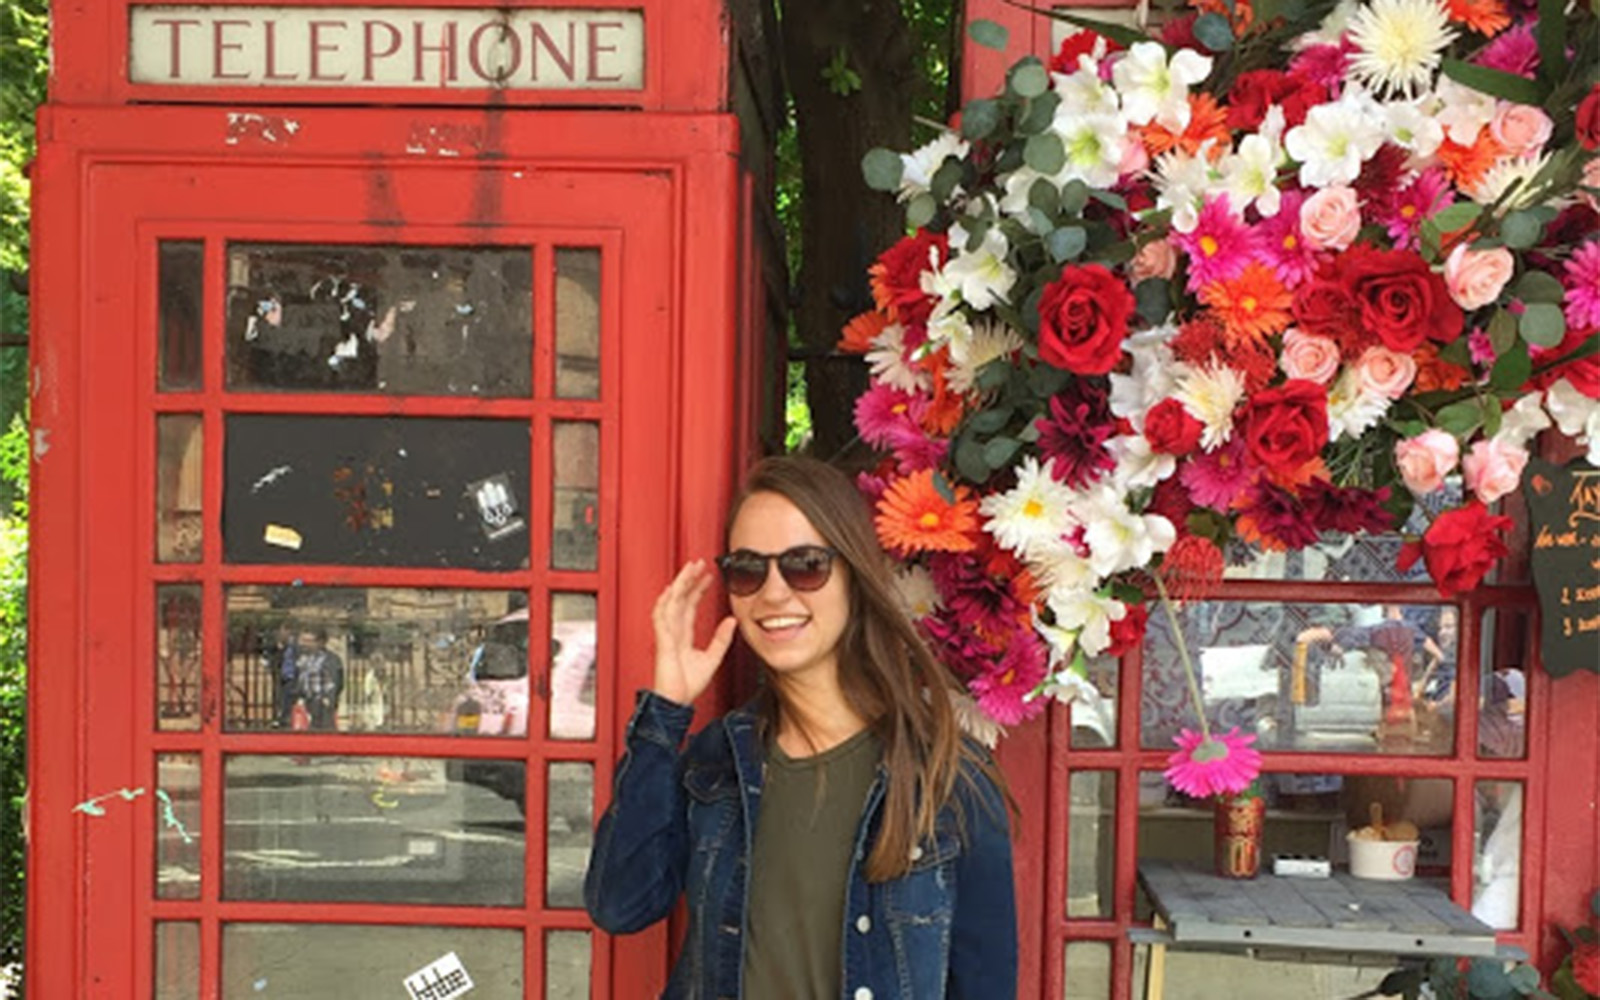 An old telephone booth in London. (Grace Guertin/UConn School of Business)